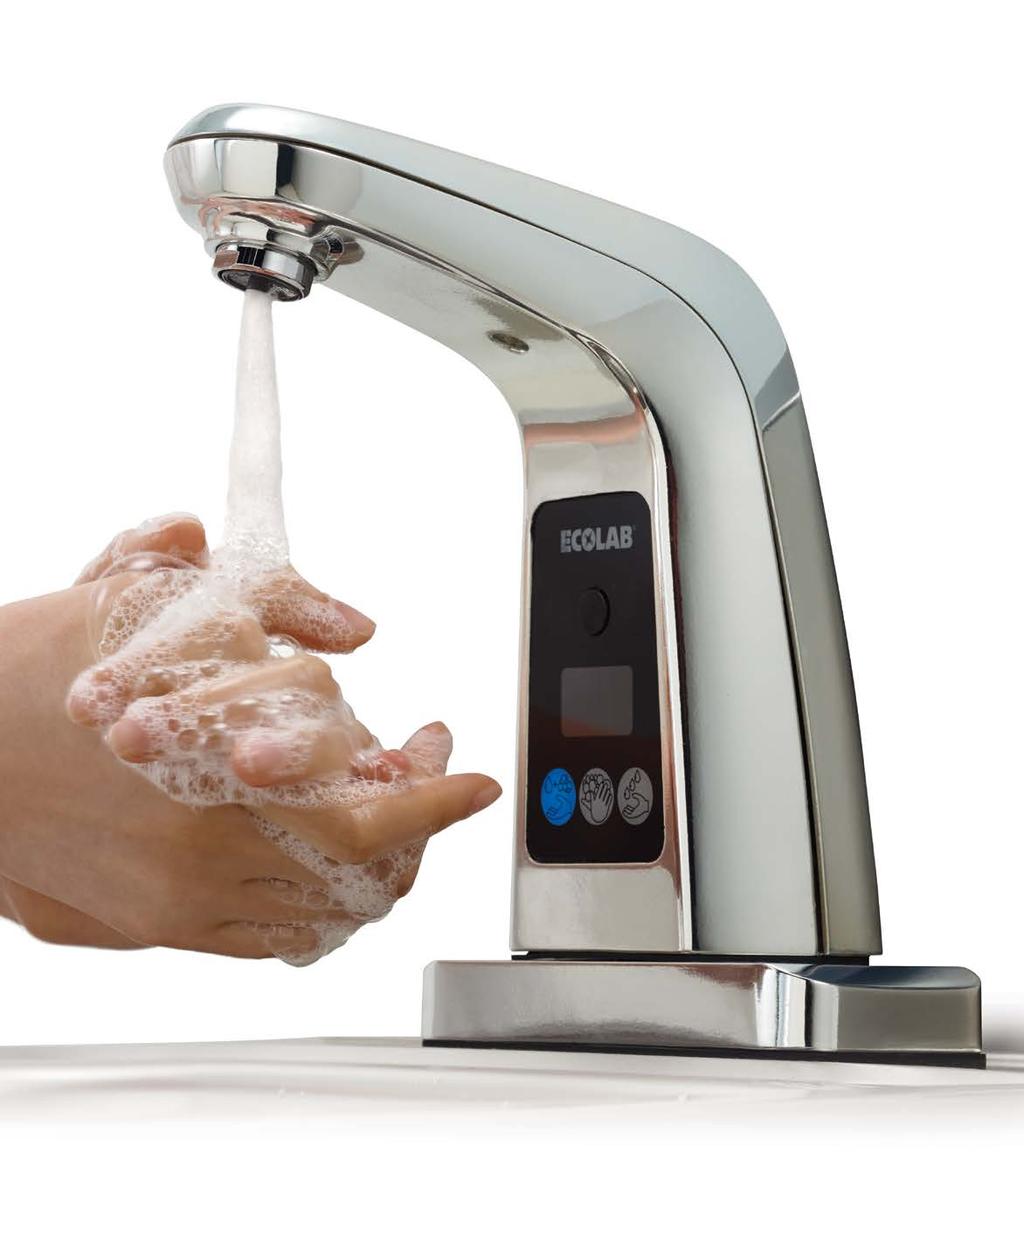 Syncra Effective handwashing made simple. A breakthrough innovation in hand hygiene, Syncra s automated touch-free water and soap delivery system provides more effective handwashing results.